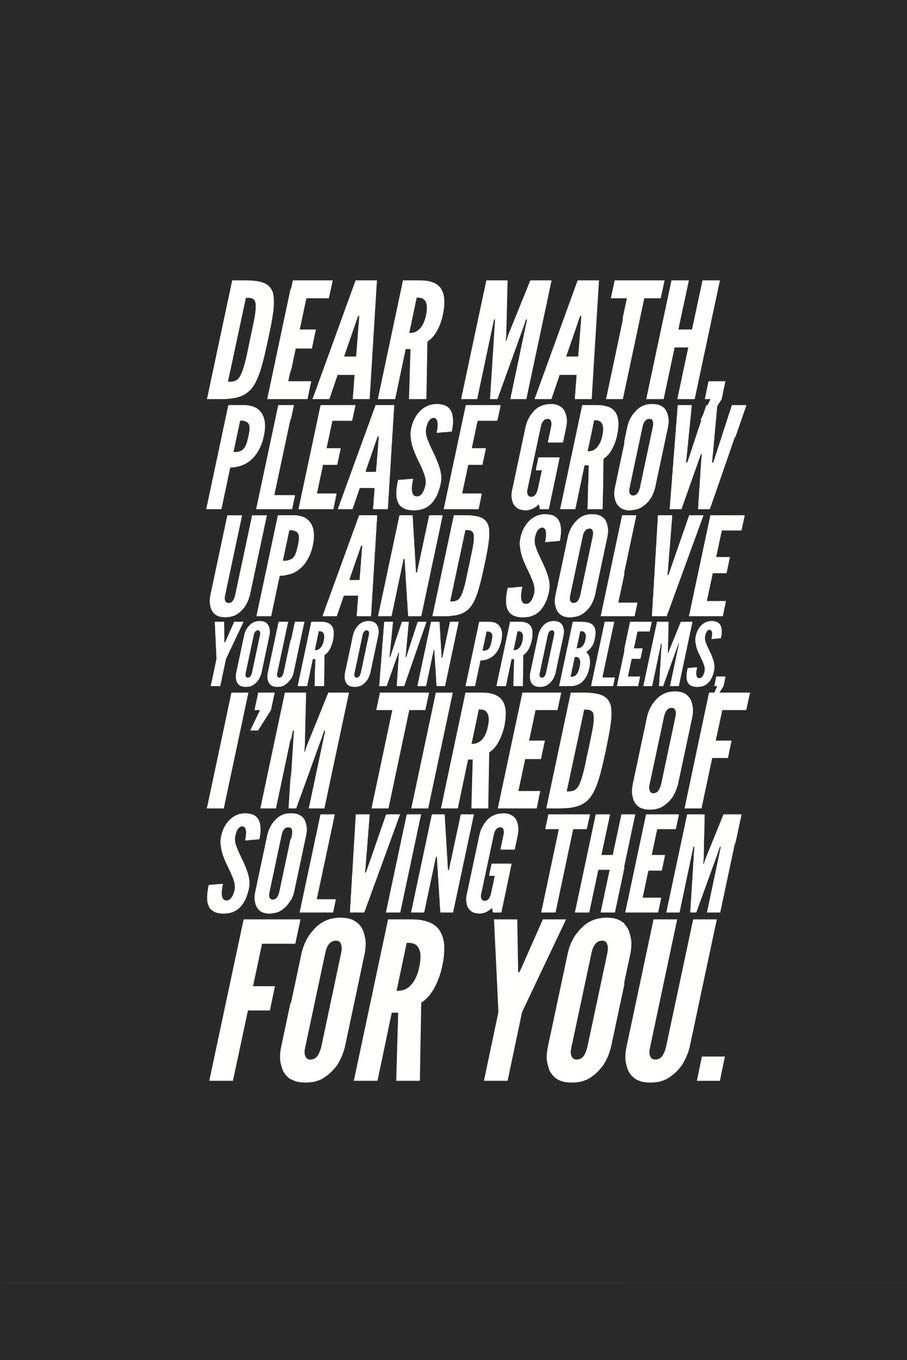 Dear Math, Please Grow Up and Solve Your Own Problems, I'm Tired of Solving Them for You.: Blank Lined Notebook with 100 Lined Pages Diary Journal 6x9 Inches: Noosita, Nina